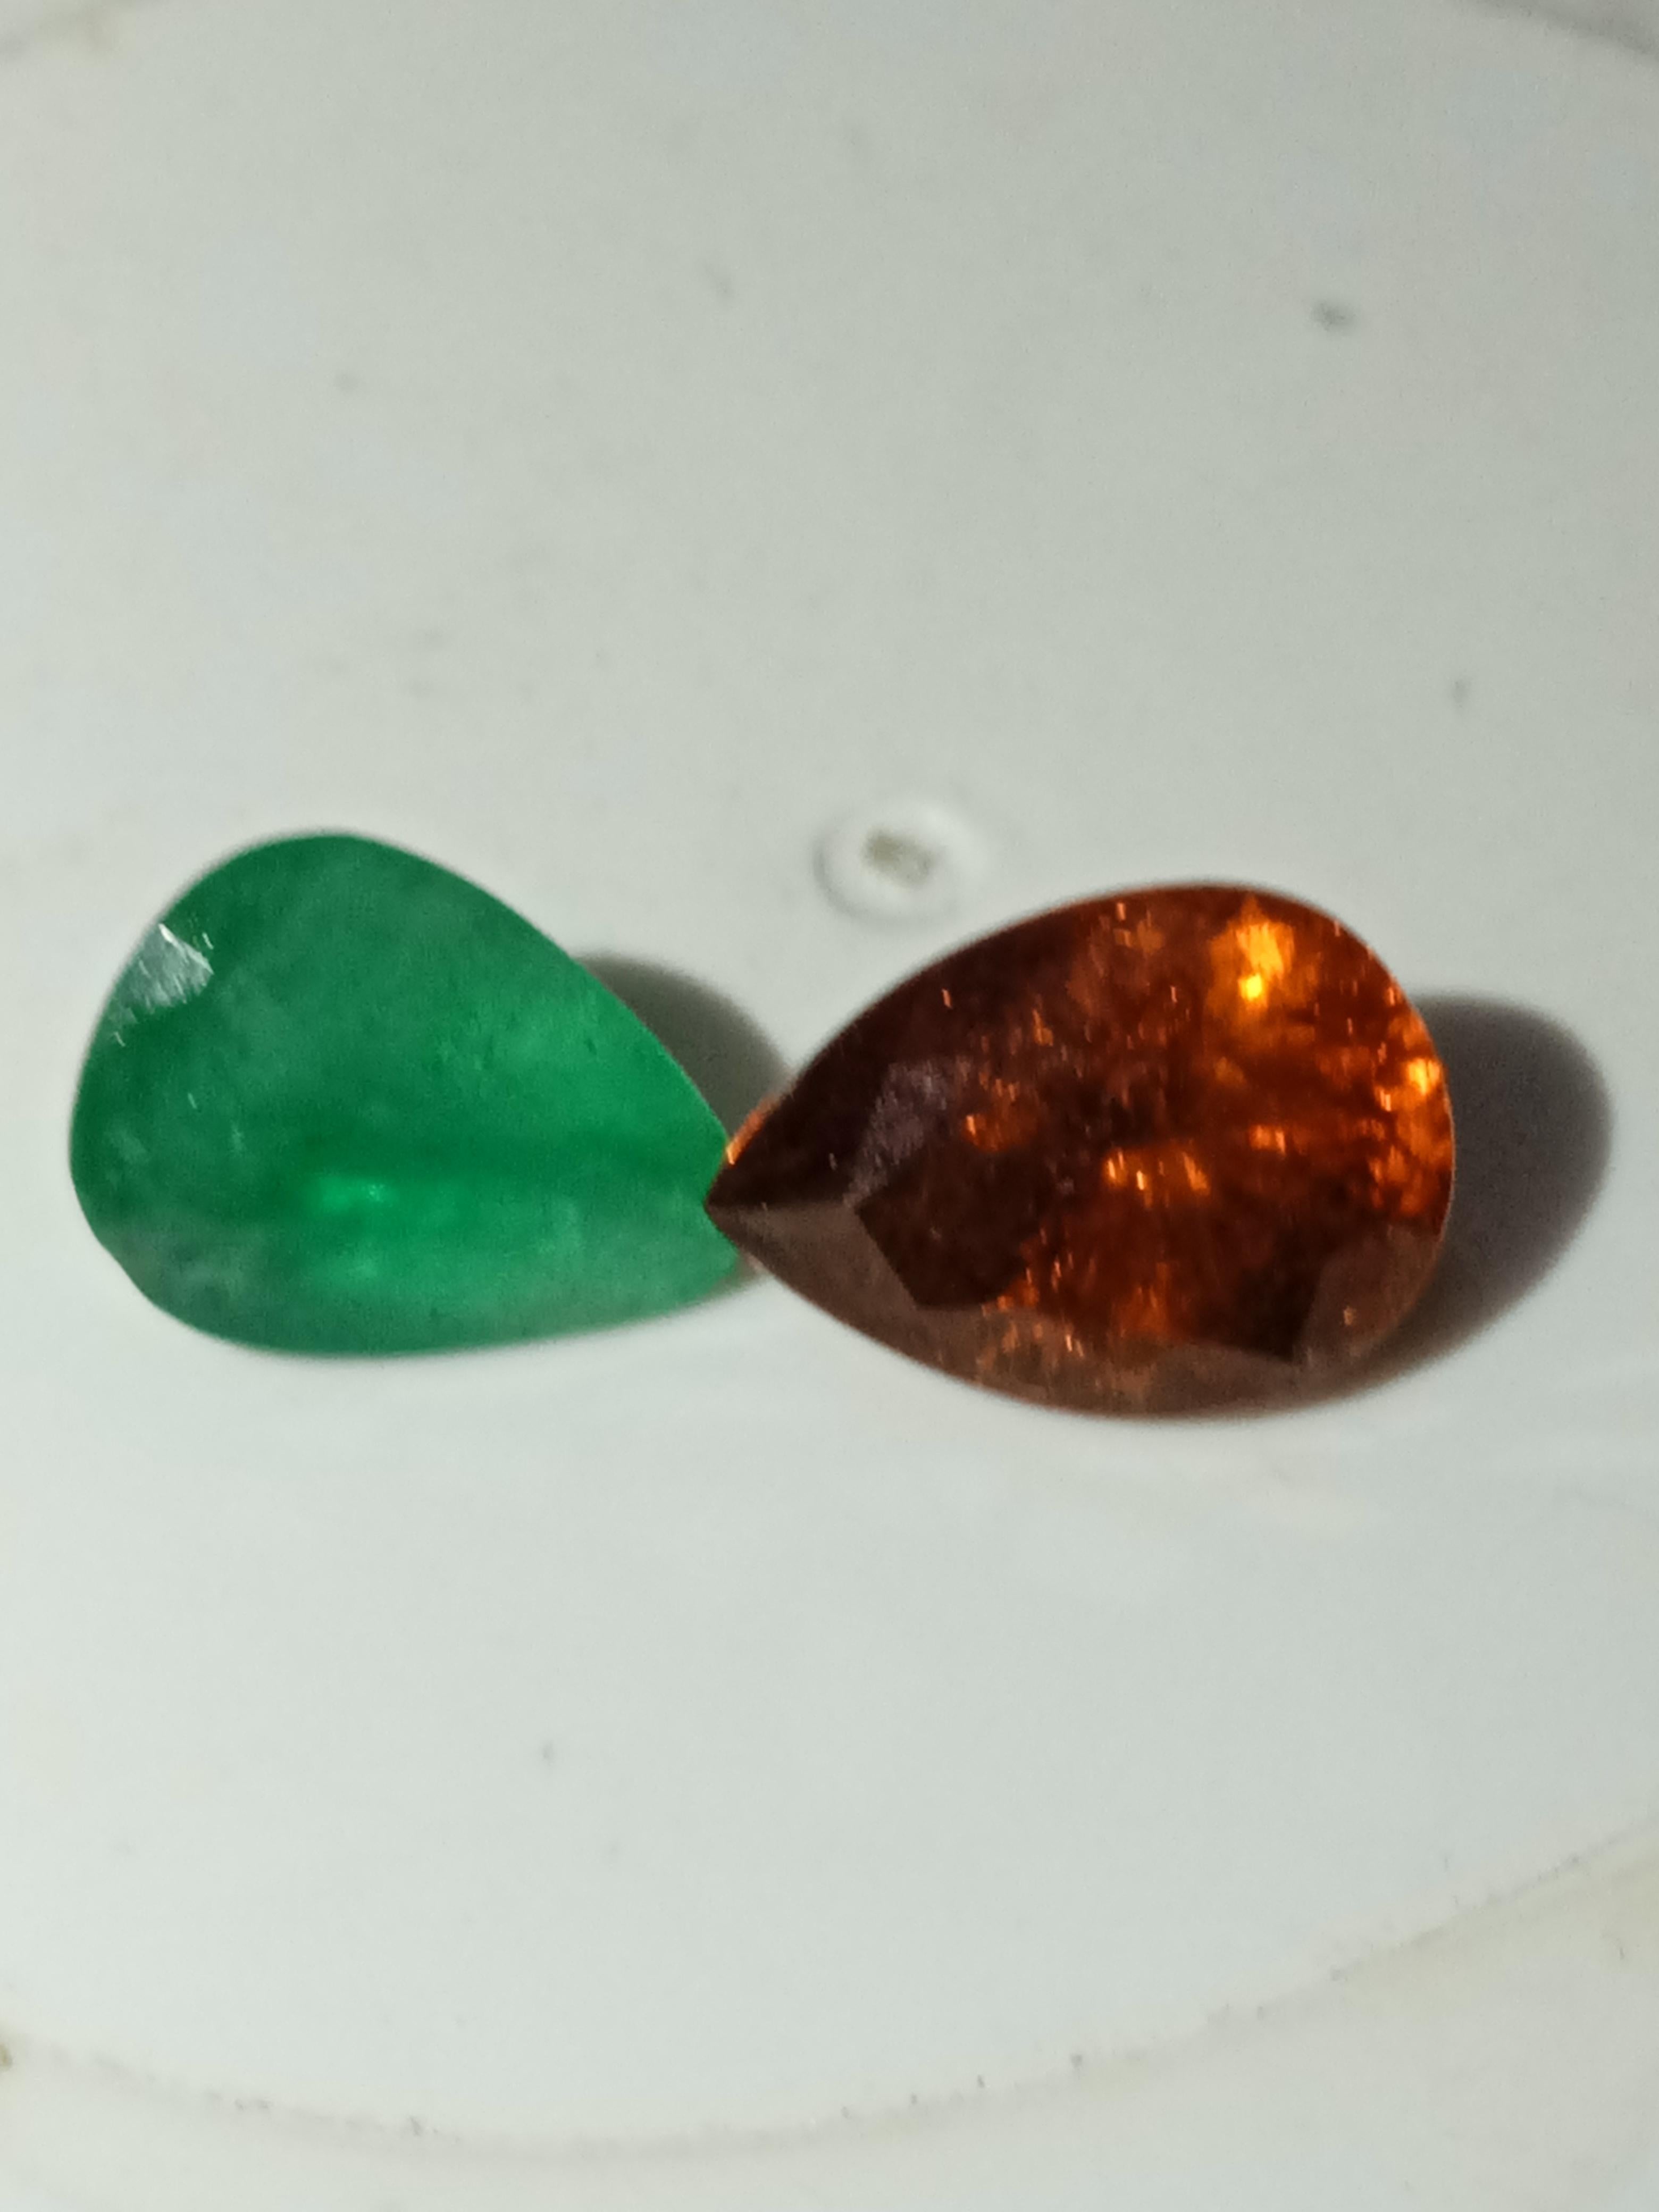 Natural Zambia emerald and spessitite garnet both weights 505 caratsAdd a touch of elegance and sophistication to your jewellery collection with this stunning pair of Natural Zambia Emerald & Spesitite Garnet. The pear-shaped gemstones boast a